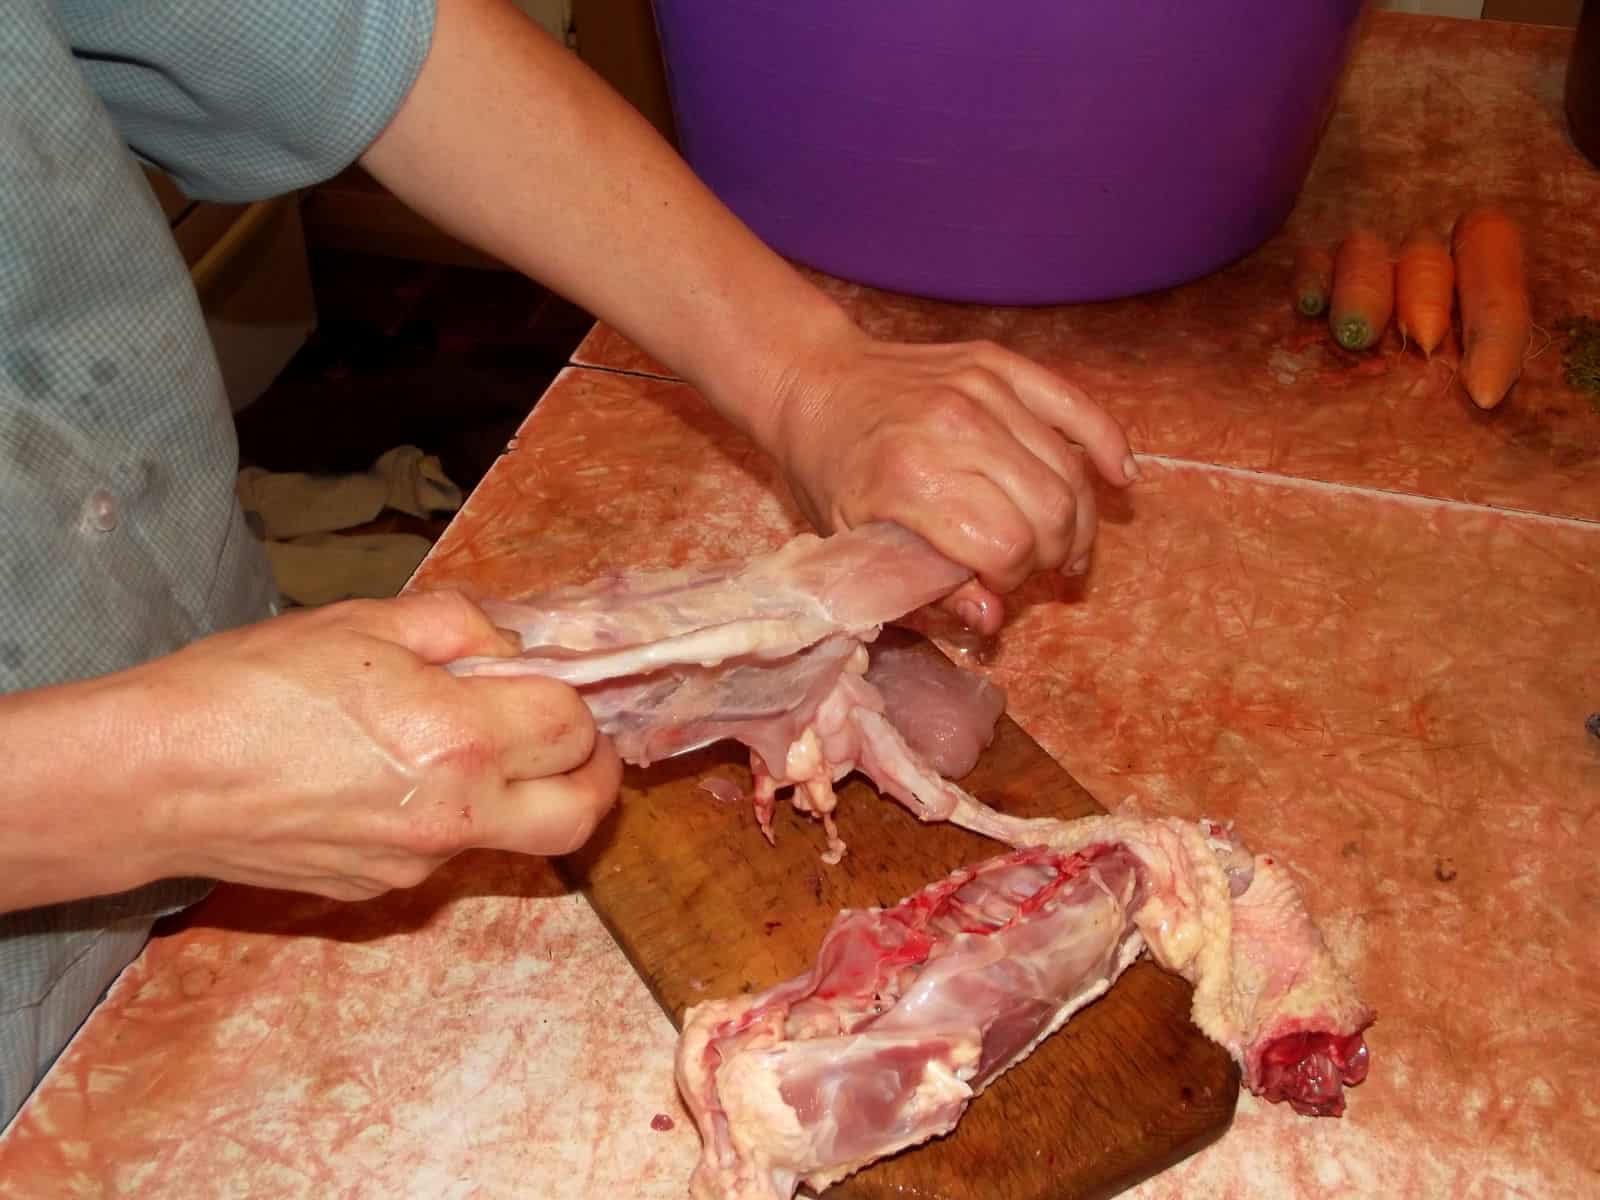 Once you've boned it about halfway back with your knife, finish pulling the meat off with your hands.